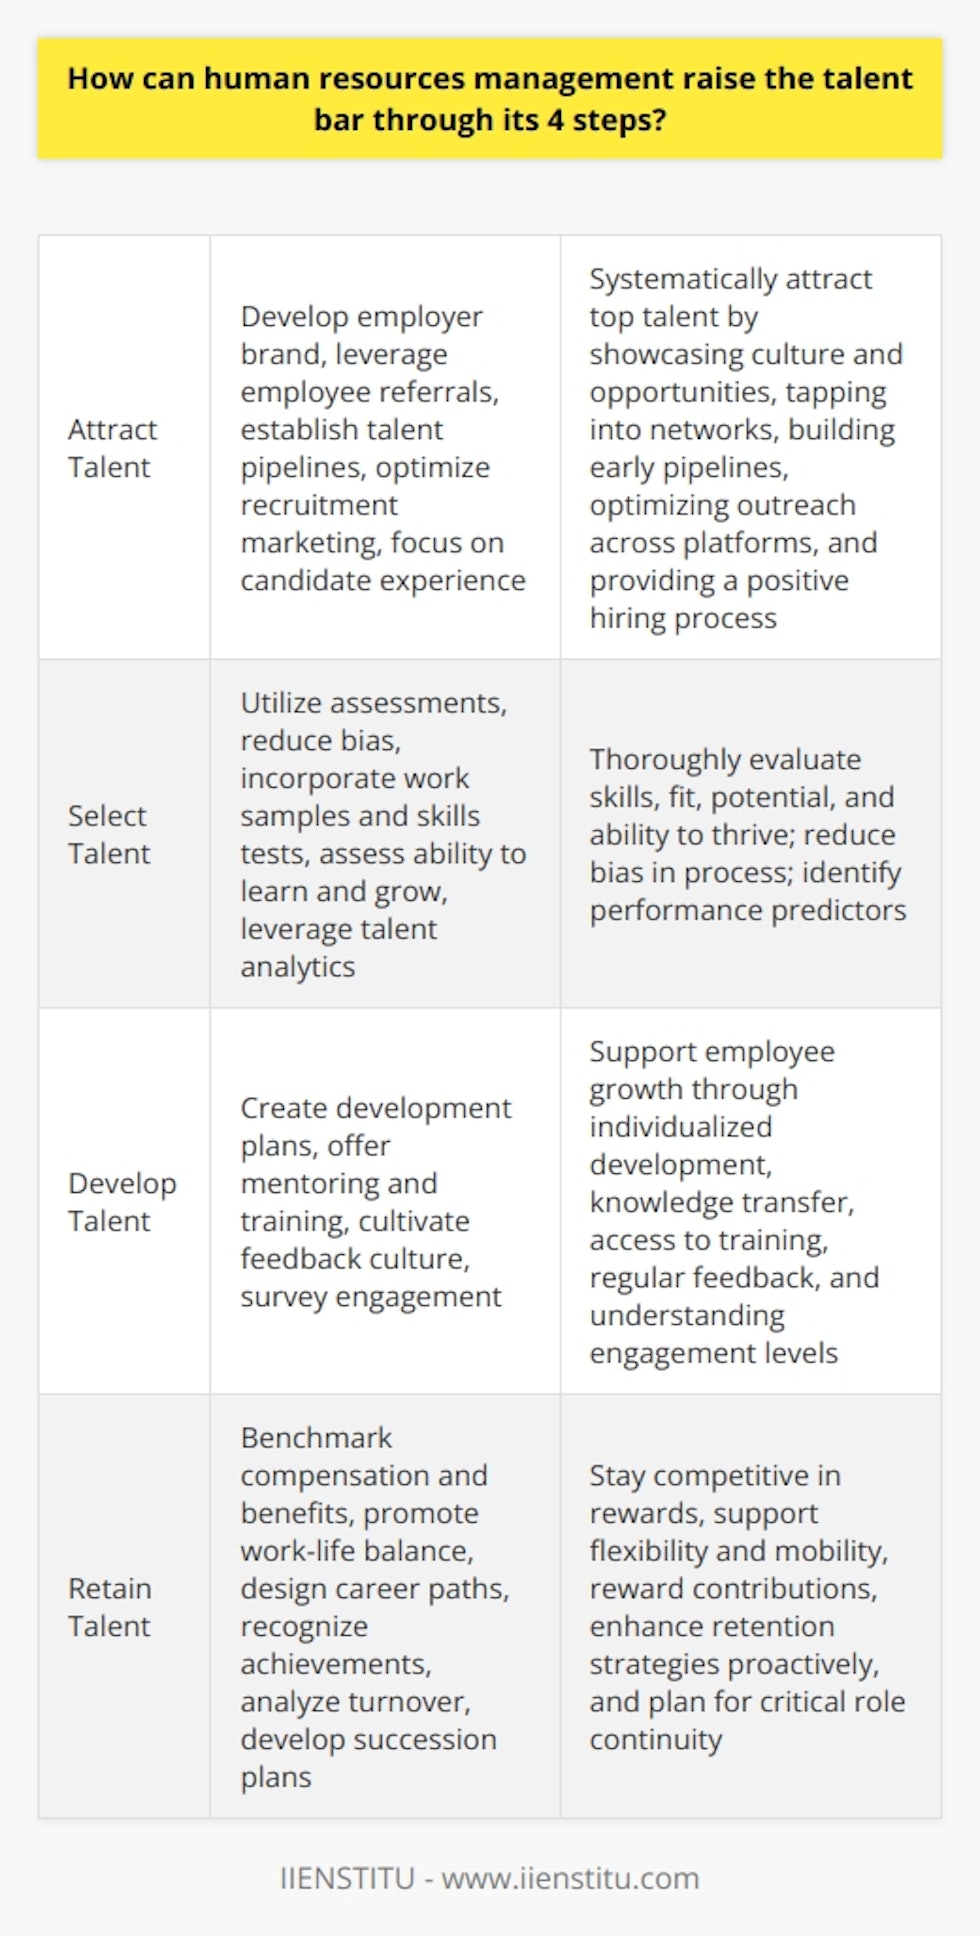 Here is some detailed content on how human resources management can raise the talent bar through 4 key steps:Attracting Talent- Develop an employer brand that highlights company culture, values, and career growth opportunities to attract top talent- Leverage employee referral programs to tap into existing staff networks  - Establish internship and apprenticeship programs to build early talent pipelines- Optimize recruitment marketing across platforms like social media, job boards, and professional associations- Focus on candidate experience throughout the hiring process to build positive perceptions Selecting Talent- Utilize competency-based interviews and assessments to evaluate skills, cultural fit and future potential- Reduce bias by having diverse panels conduct structured interviews with defined evaluation criteria- Incorporate work samples, simulations and skills testing into the selection process - Assess candidates' ability to learn, adapt, and grow in addition to technical qualifications- Leverage data and talent analytics to identify predictors of high performanceDeveloping Talent- Create individualized development plans to support growth and advancement- Offer formal mentoring and coaching programs to transfer knowledge and skills- Provide access to online and in-person training and development programs- Cultivate an open feedback culture through regular check-ins and performance reviews- Survey employee engagement and satisfaction to inform retention initiativesRetaining Talent  - Benchmark and optimize compensation, benefits, and perks to stay competitive- Promote work-life balance through flexible work arrangements and paid time off- Design clear career paths with opportunities for advancement and mobility- Recognize and reward contributions and achievements  - Analyze turnover data to identify risk factors and enhance retention strategies- Develop robust succession plans for critical rolesBy improving how HR attracts, selects, develops and retains top talent, organizations can systematically raise the talent bar and gain a sustained competitive advantage. The focus should be on evidence-based and data-driven practices at each step.